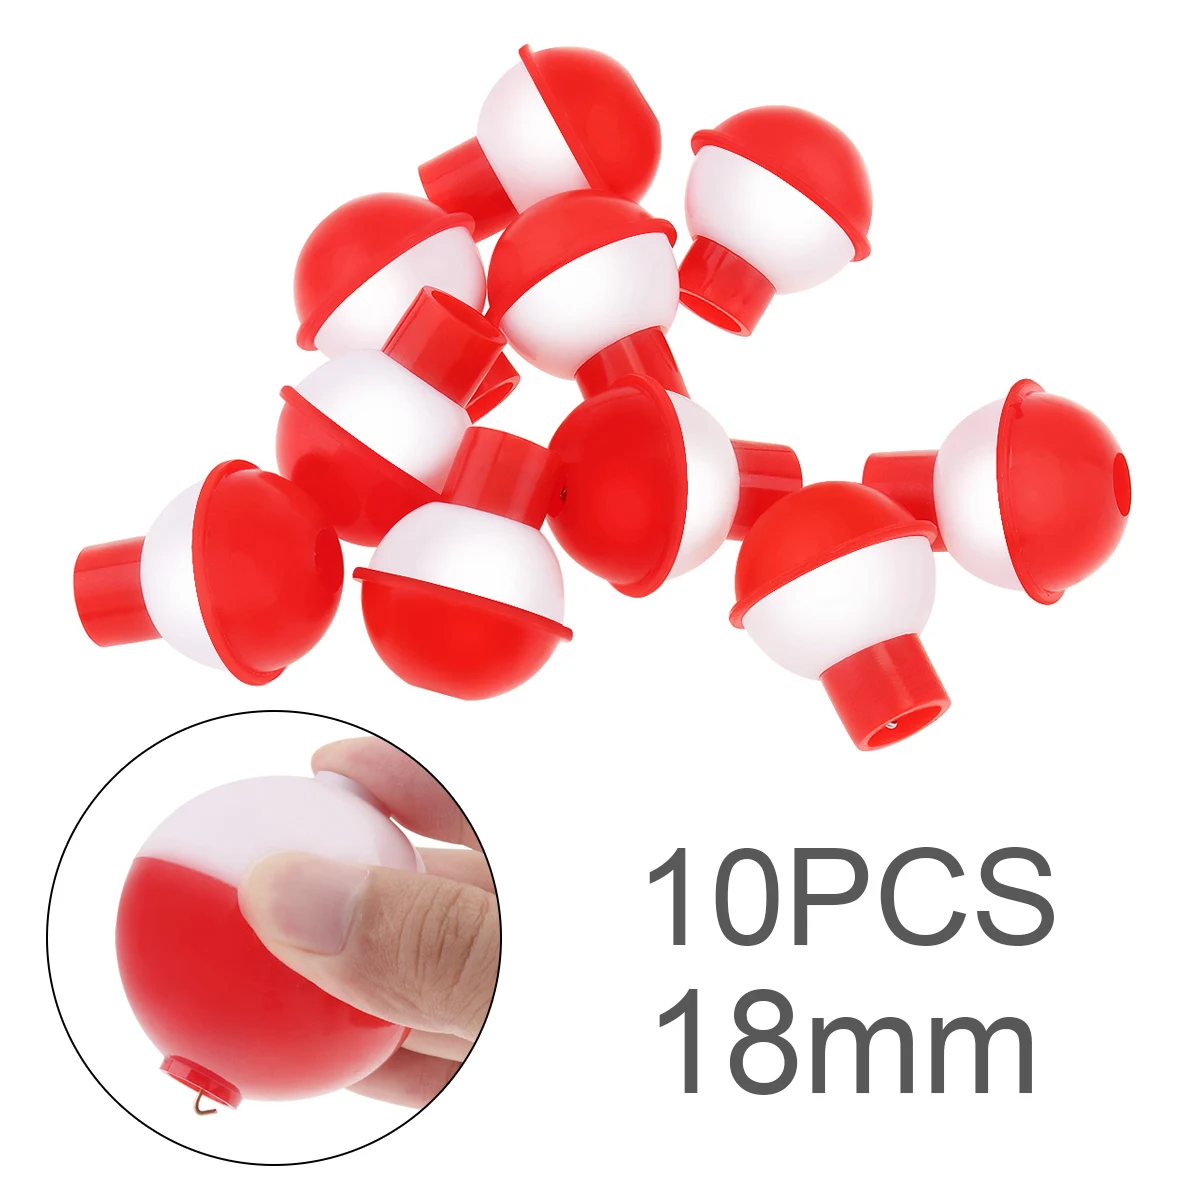 

10pcs/lot 18mm / 0.70inch Fishing Bobber Floats Set Hard ABS Snap on Red White Push Button Round Buoy Small Size